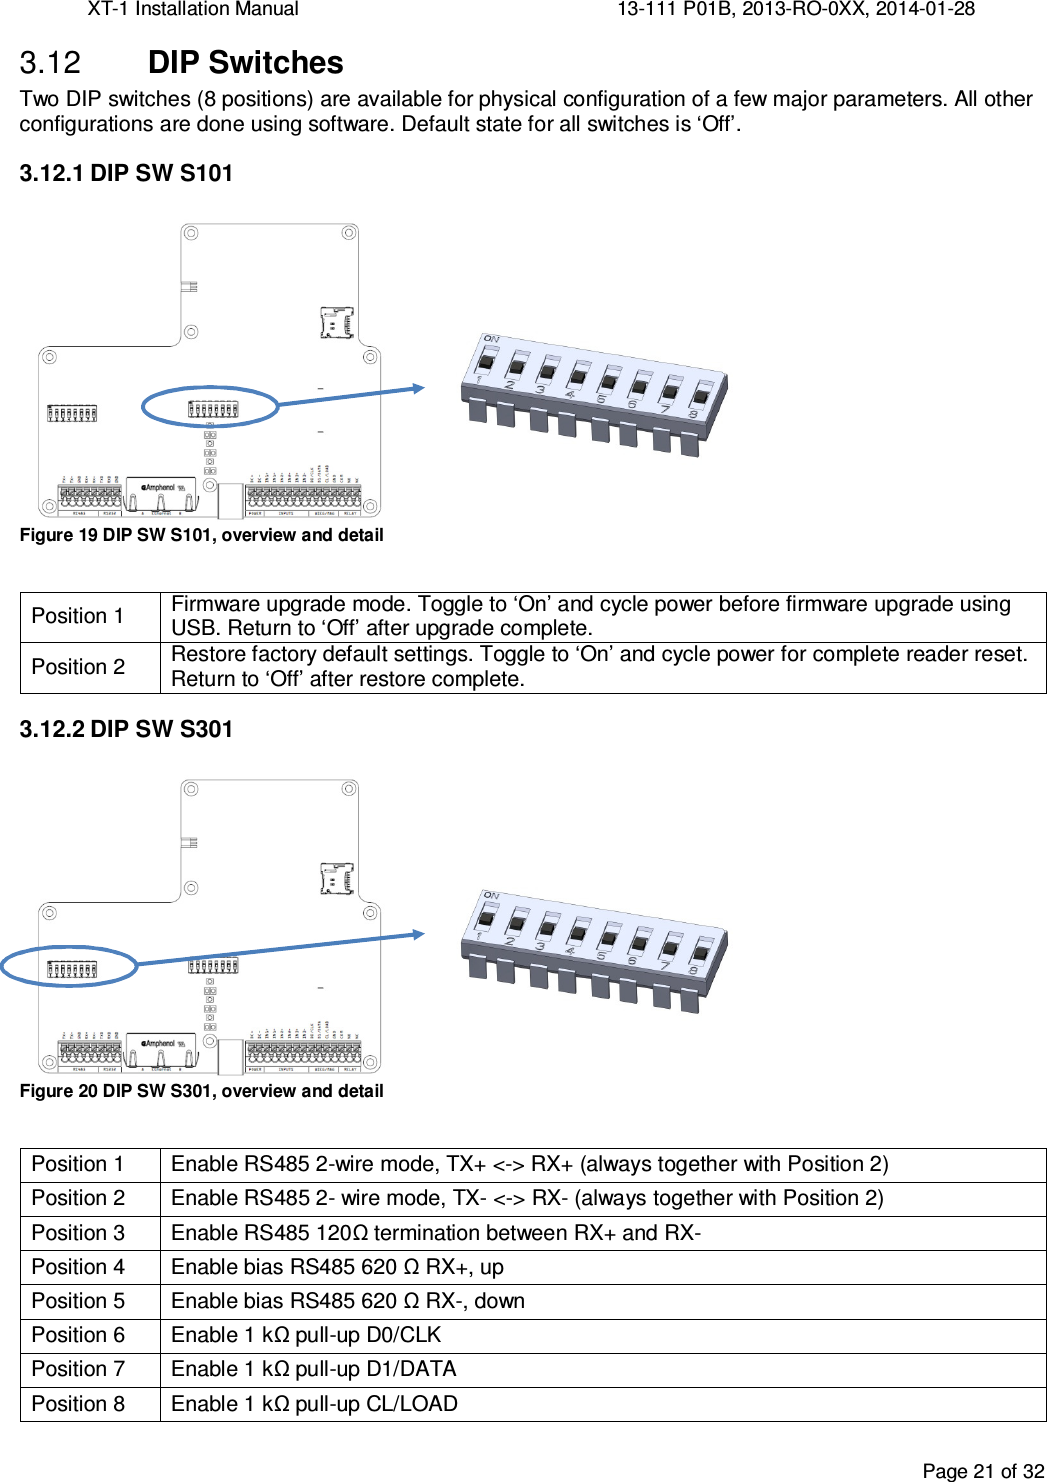 XT-1 Installation Manual     13-111 P01B, 2013-RO-0XX, 2014-01-28  Page 21 of 32   DIP Switches 3.12Two DIP switches (8 positions) are available for physical configuration of a few major parameters. All other configurations are done using software. Default state for all switches is ‘Off’. 3.12.1 DIP SW S101  Figure 19 DIP SW S101, overview and detail  Position 1 Firmware upgrade mode. Toggle to ‘On’ and cycle power before firmware upgrade using USB. Return to ‘Off’ after upgrade complete. Position 2  Restore factory default settings. Toggle to ‘On’ and cycle power for complete reader reset. Return to ‘Off’ after restore complete. 3.12.2 DIP SW S301  Figure 20 DIP SW S301, overview and detail  Position 1  Enable RS485 2-wire mode, TX+ &lt;-&gt; RX+ (always together with Position 2) Position 2  Enable RS485 2- wire mode, TX- &lt;-&gt; RX- (always together with Position 2) Position 3  Enable RS485 120Ω termination between RX+ and RX- Position 4  Enable bias RS485 620 Ω RX+, up  Position 5  Enable bias RS485 620 Ω RX-, down Position 6  Enable 1 kΩ pull-up D0/CLK Position 7  Enable 1 kΩ pull-up D1/DATA Position 8  Enable 1 kΩ pull-up CL/LOAD   